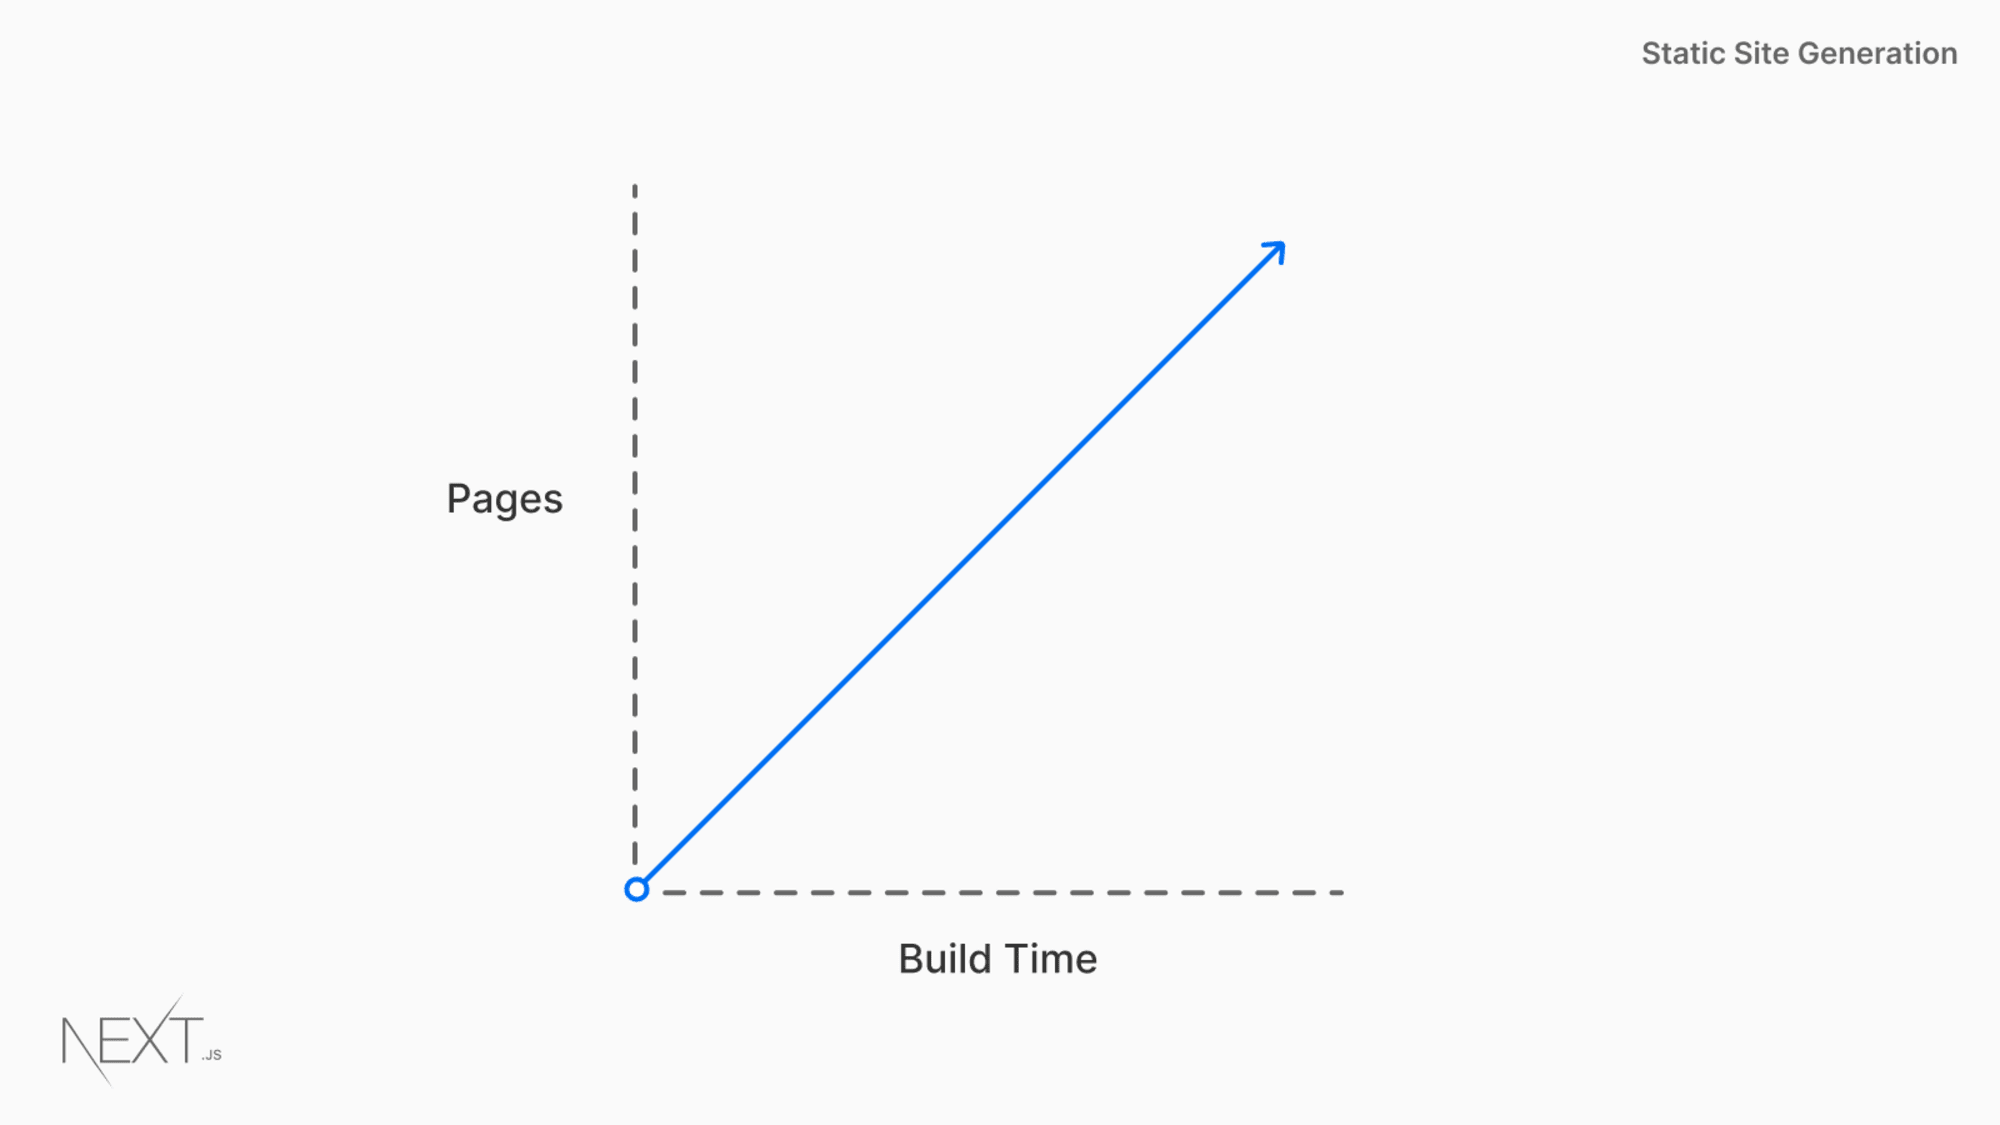 The Problem with Static-Site Generation: Because build-times scale linearly with the number of pages, you might be stuck waiting for hours for your site to build.